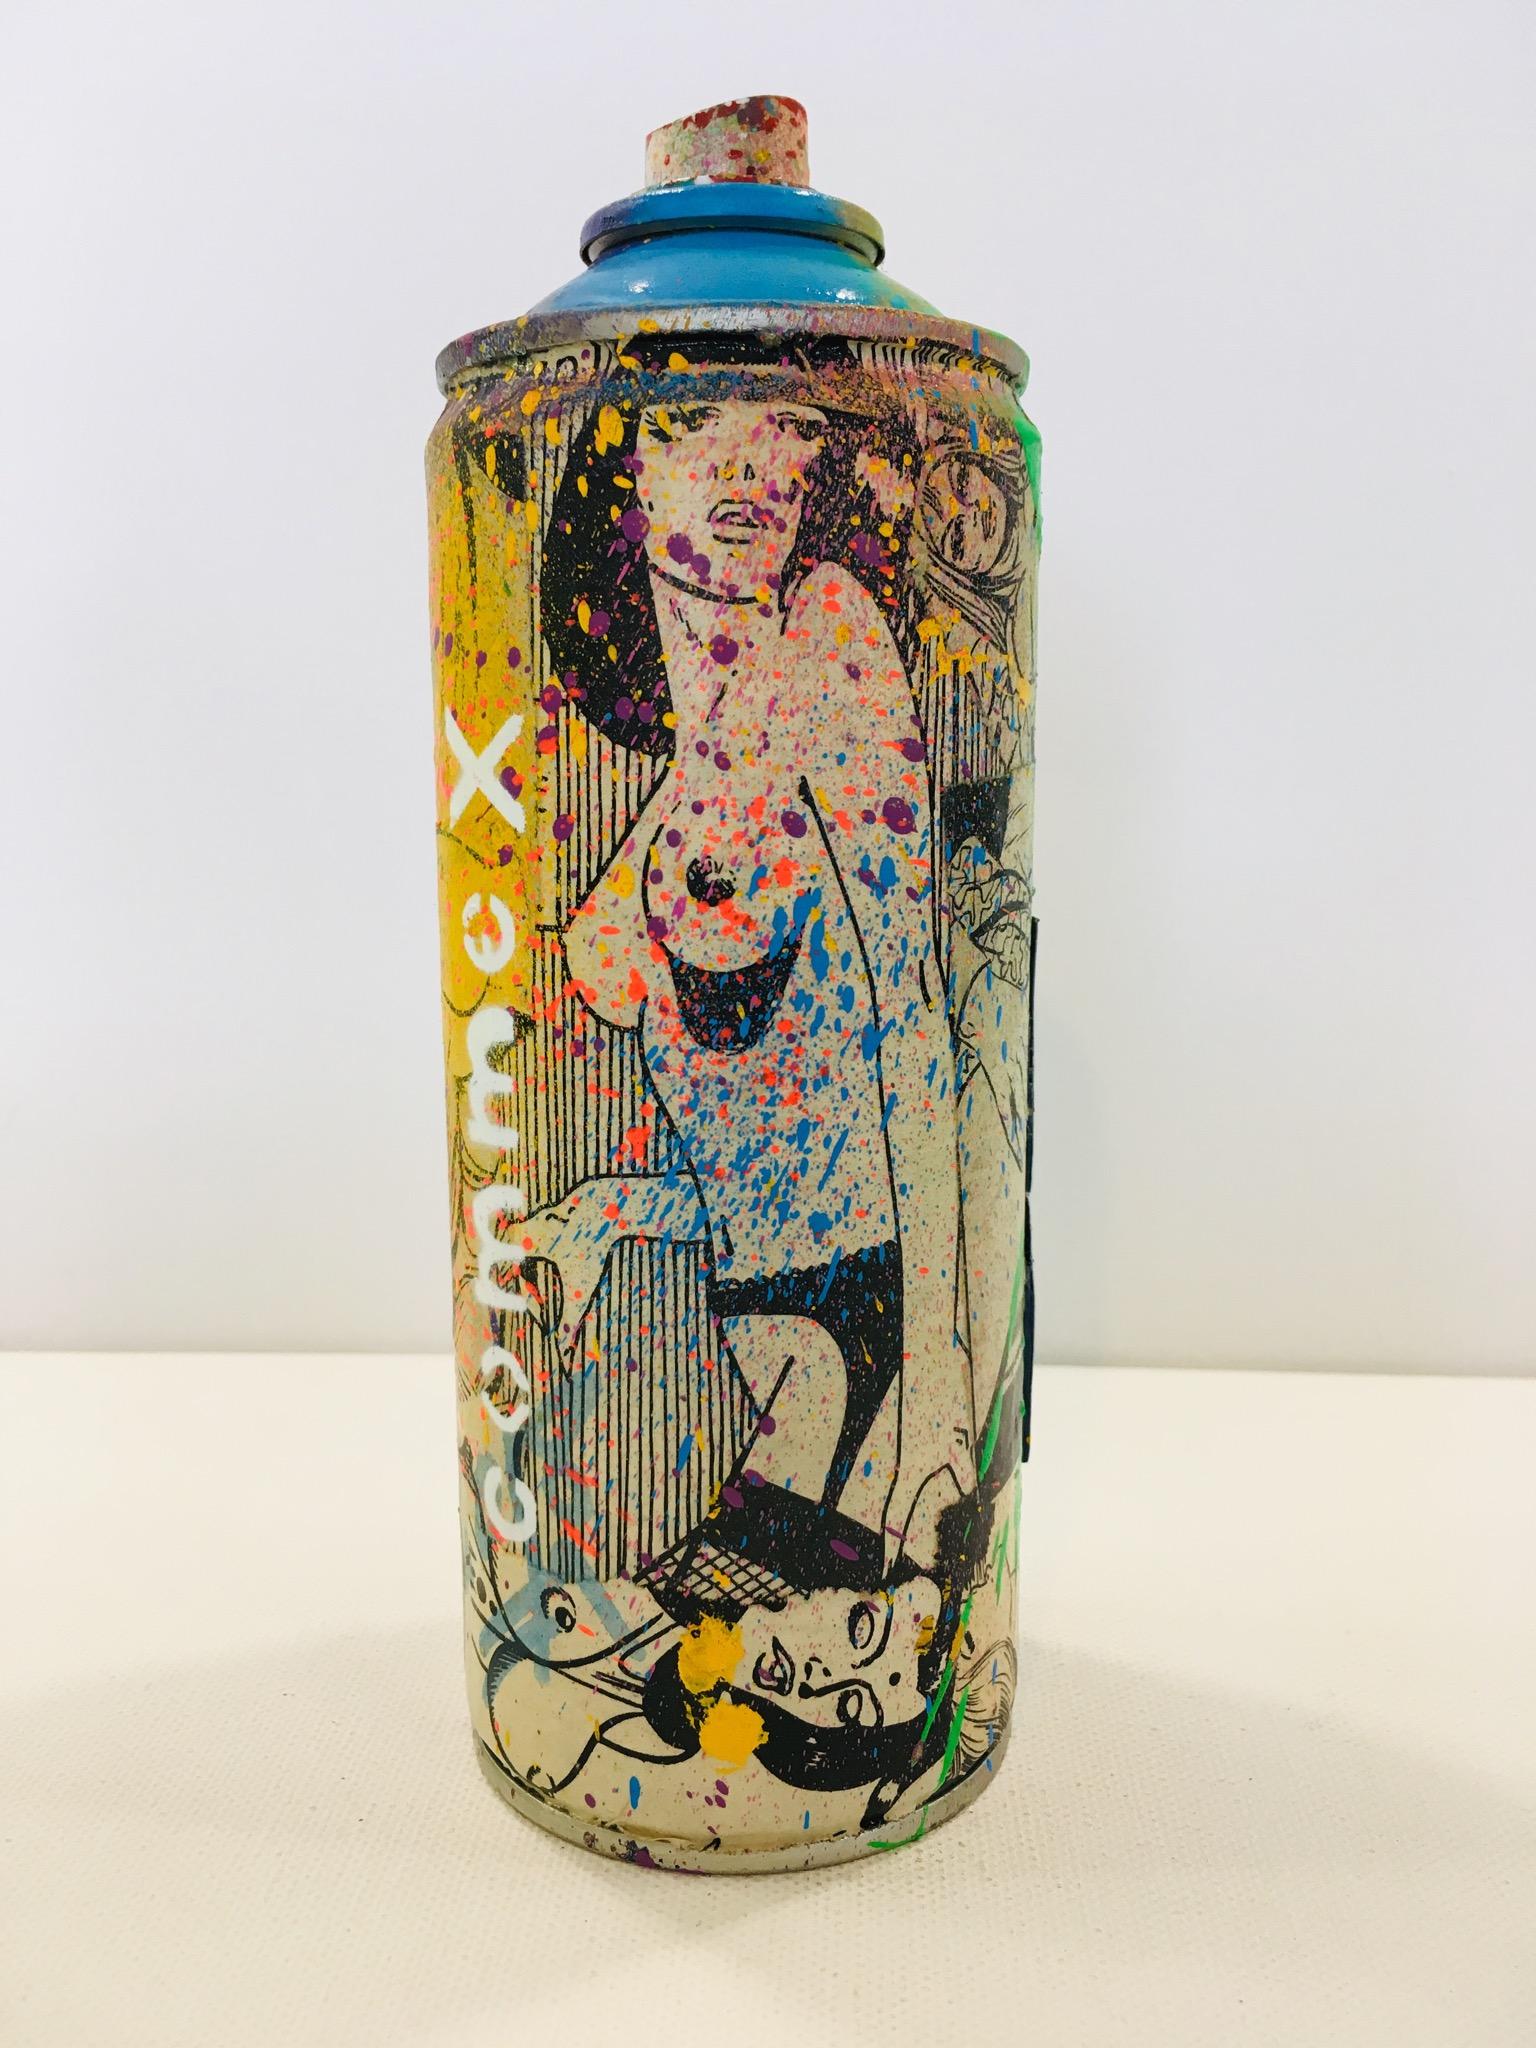 Between street art and pop art KIKI revisits the mythology of superheroes and erotic images ...
Recycled aerosol bomb (inert and empty of any residues) ... Collages from standard comics puzzles and 